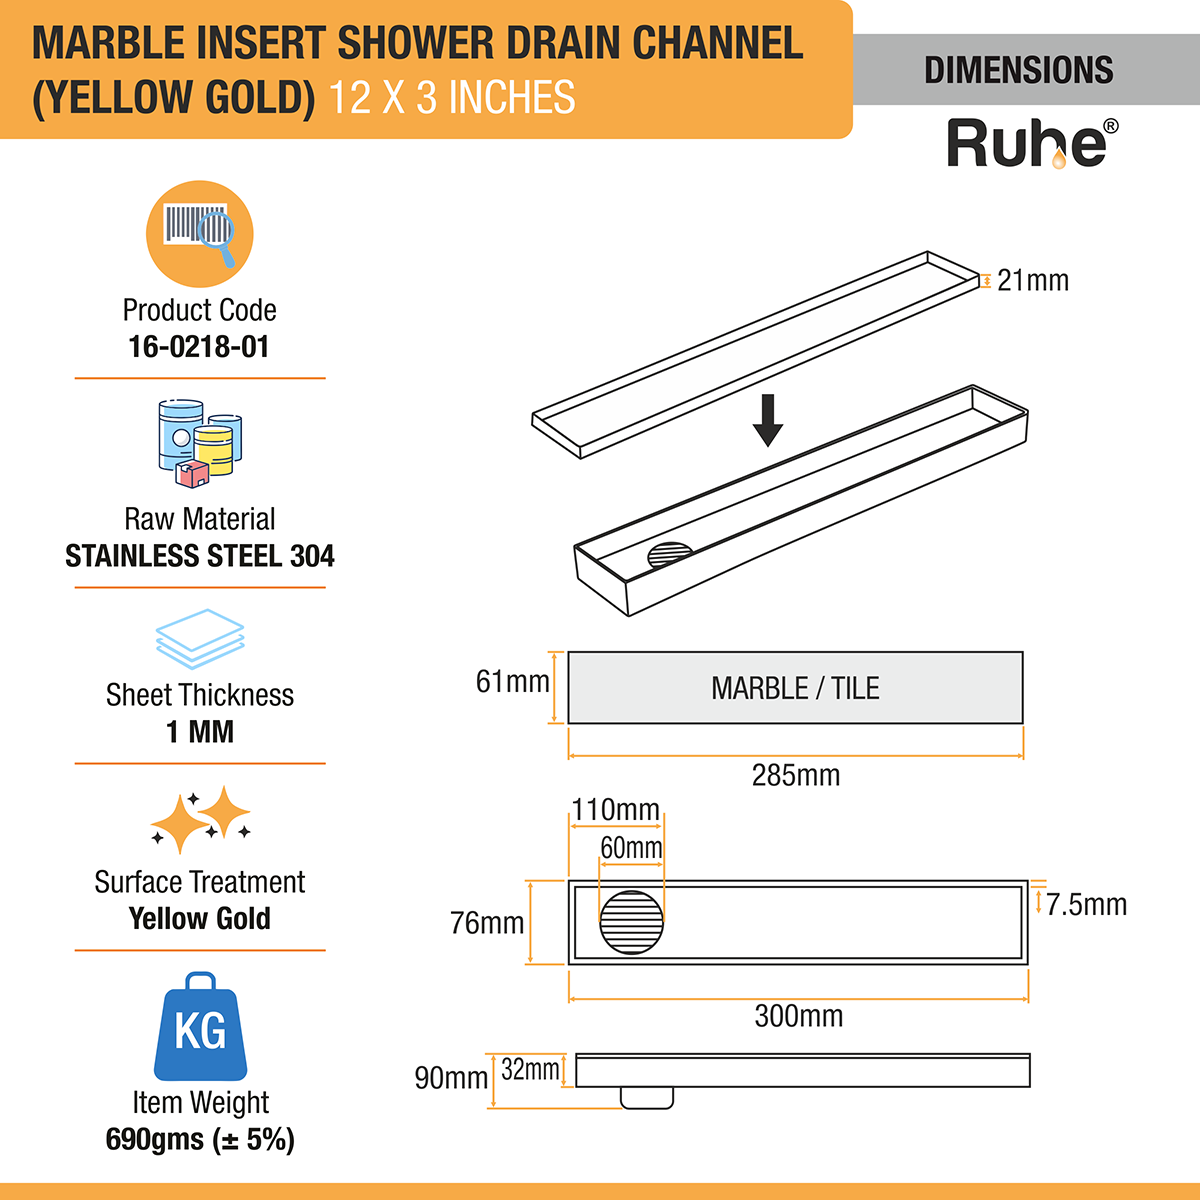 Marble Insert Shower Drain Channel (12 x 3 Inches) YELLOW GOLD PVD Coated dimensions and sizes